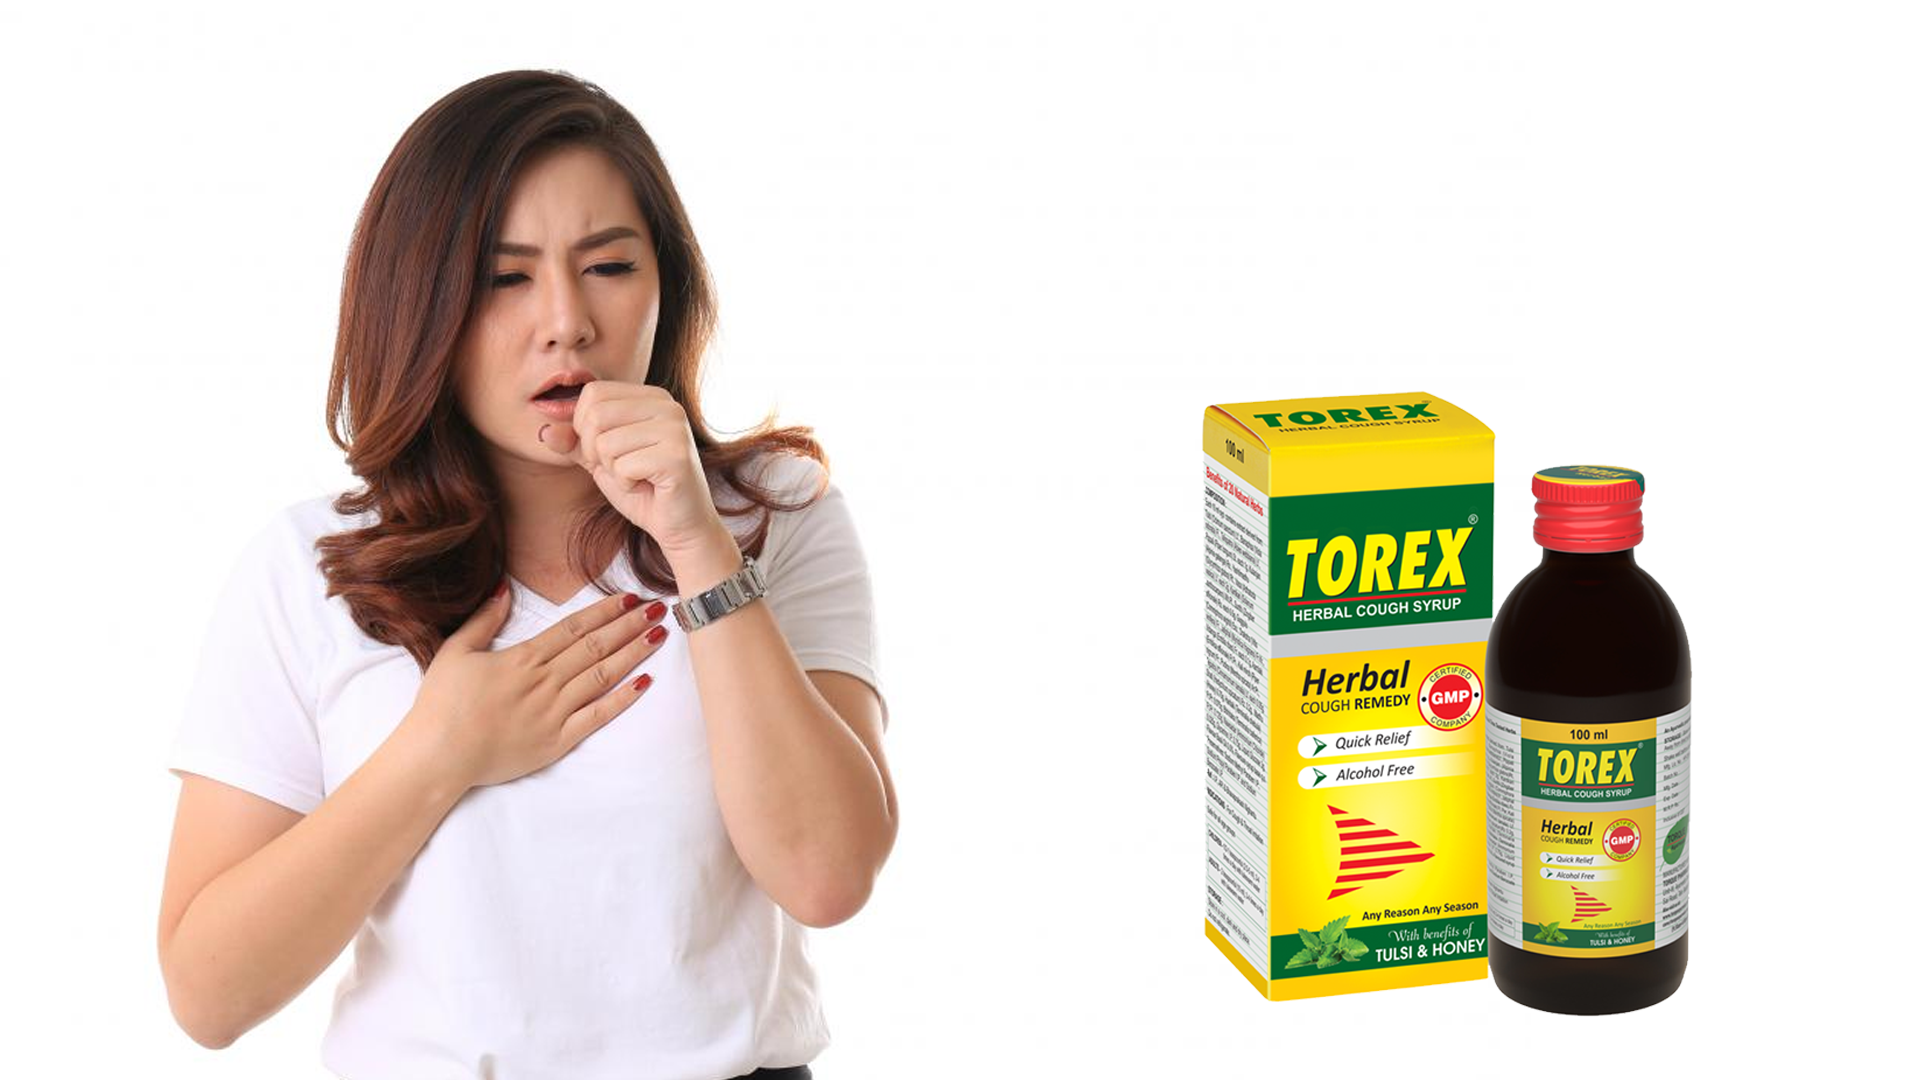 Torex cough syrup